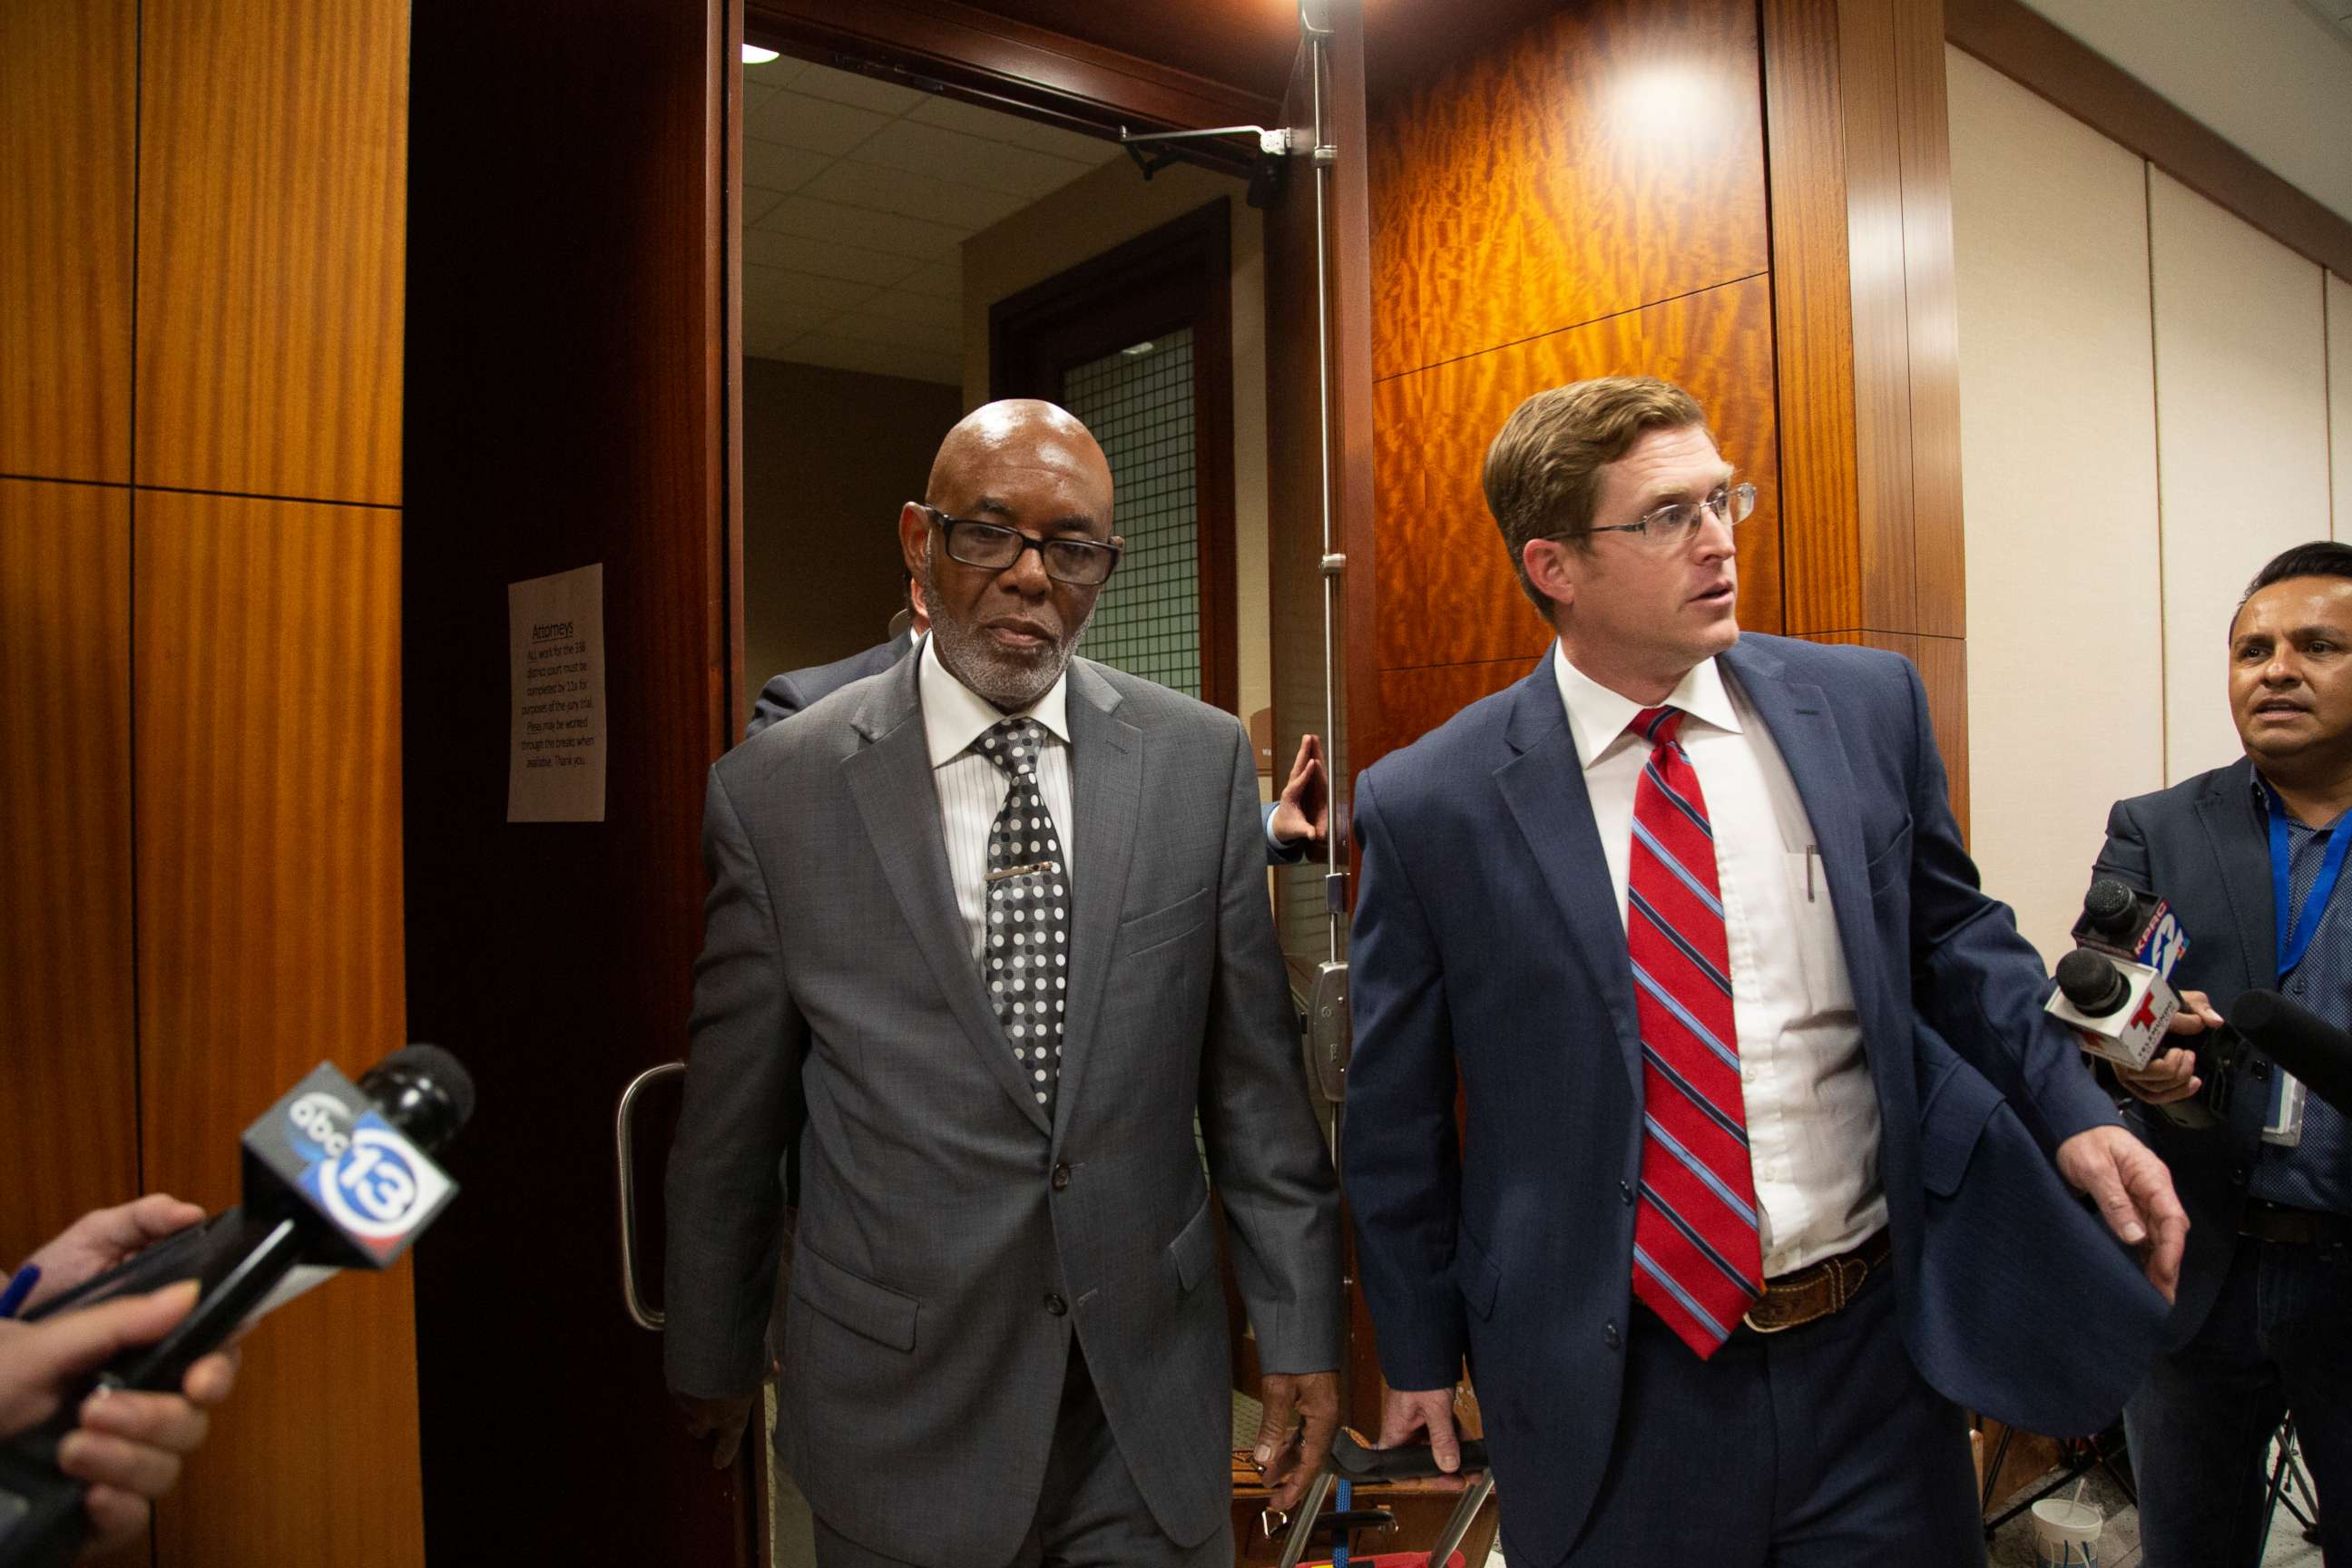 PHOTO: Otis Mallet, center, exits the 338th District Criminal Court with his lawyer Jonathan Landers, right, Jan. 9, 2020,